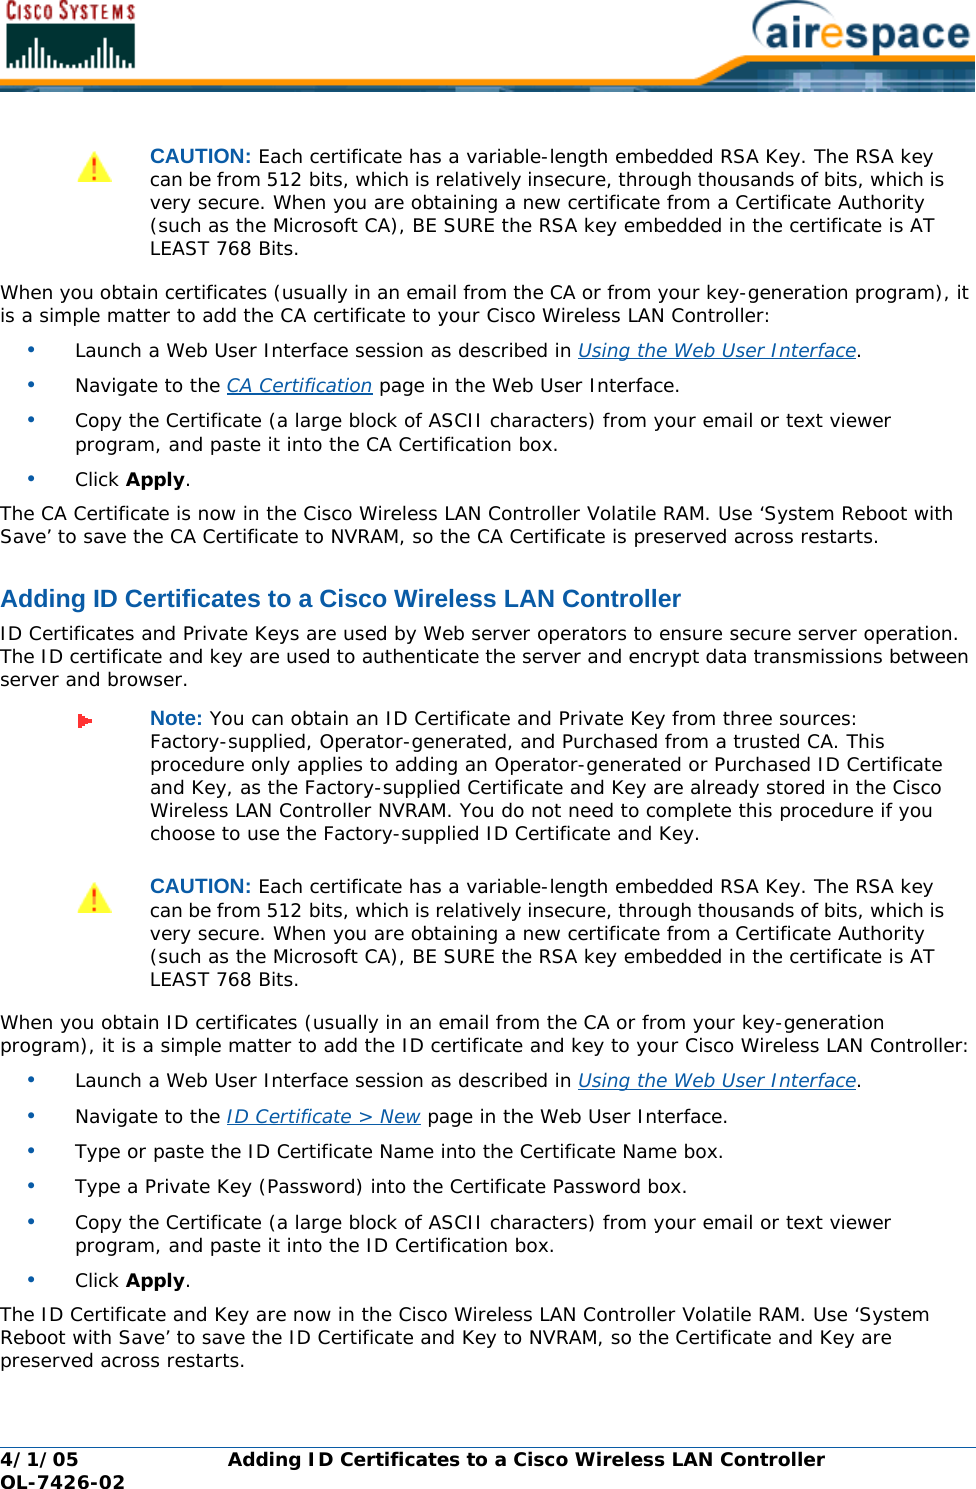 4/1/05 Adding ID Certificates to a Cisco Wireless LAN Controller  OL-7426-02When you obtain certificates (usually in an email from the CA or from your key-generation program), it is a simple matter to add the CA certificate to your Cisco Wireless LAN Controller:•Launch a Web User Interface session as described in Using the Web User Interface.•Navigate to the CA Certification page in the Web User Interface.•Copy the Certificate (a large block of ASCII characters) from your email or text viewer program, and paste it into the CA Certification box.•Click Apply.The CA Certificate is now in the Cisco Wireless LAN Controller Volatile RAM. Use ‘System Reboot with Save’ to save the CA Certificate to NVRAM, so the CA Certificate is preserved across restarts.Adding ID Certificates to a Cisco Wireless LAN ControllerAdding ID Certificates to a Cisco Wireless LAN ControllerID Certificates and Private Keys are used by Web server operators to ensure secure server operation. The ID certificate and key are used to authenticate the server and encrypt data transmissions between server and browser. When you obtain ID certificates (usually in an email from the CA or from your key-generation program), it is a simple matter to add the ID certificate and key to your Cisco Wireless LAN Controller:•Launch a Web User Interface session as described in Using the Web User Interface.•Navigate to the ID Certificate &gt; New page in the Web User Interface.•Type or paste the ID Certificate Name into the Certificate Name box.•Type a Private Key (Password) into the Certificate Password box.•Copy the Certificate (a large block of ASCII characters) from your email or text viewer program, and paste it into the ID Certification box.•Click Apply.The ID Certificate and Key are now in the Cisco Wireless LAN Controller Volatile RAM. Use ‘System Reboot with Save’ to save the ID Certificate and Key to NVRAM, so the Certificate and Key are preserved across restarts.CAUTION: Each certificate has a variable-length embedded RSA Key. The RSA key can be from 512 bits, which is relatively insecure, through thousands of bits, which is very secure. When you are obtaining a new certificate from a Certificate Authority (such as the Microsoft CA), BE SURE the RSA key embedded in the certificate is AT LEAST 768 Bits.Note: You can obtain an ID Certificate and Private Key from three sources: Factory-supplied, Operator-generated, and Purchased from a trusted CA. This procedure only applies to adding an Operator-generated or Purchased ID Certificate and Key, as the Factory-supplied Certificate and Key are already stored in the Cisco Wireless LAN Controller NVRAM. You do not need to complete this procedure if you choose to use the Factory-supplied ID Certificate and Key.CAUTION: Each certificate has a variable-length embedded RSA Key. The RSA key can be from 512 bits, which is relatively insecure, through thousands of bits, which is very secure. When you are obtaining a new certificate from a Certificate Authority (such as the Microsoft CA), BE SURE the RSA key embedded in the certificate is AT LEAST 768 Bits.